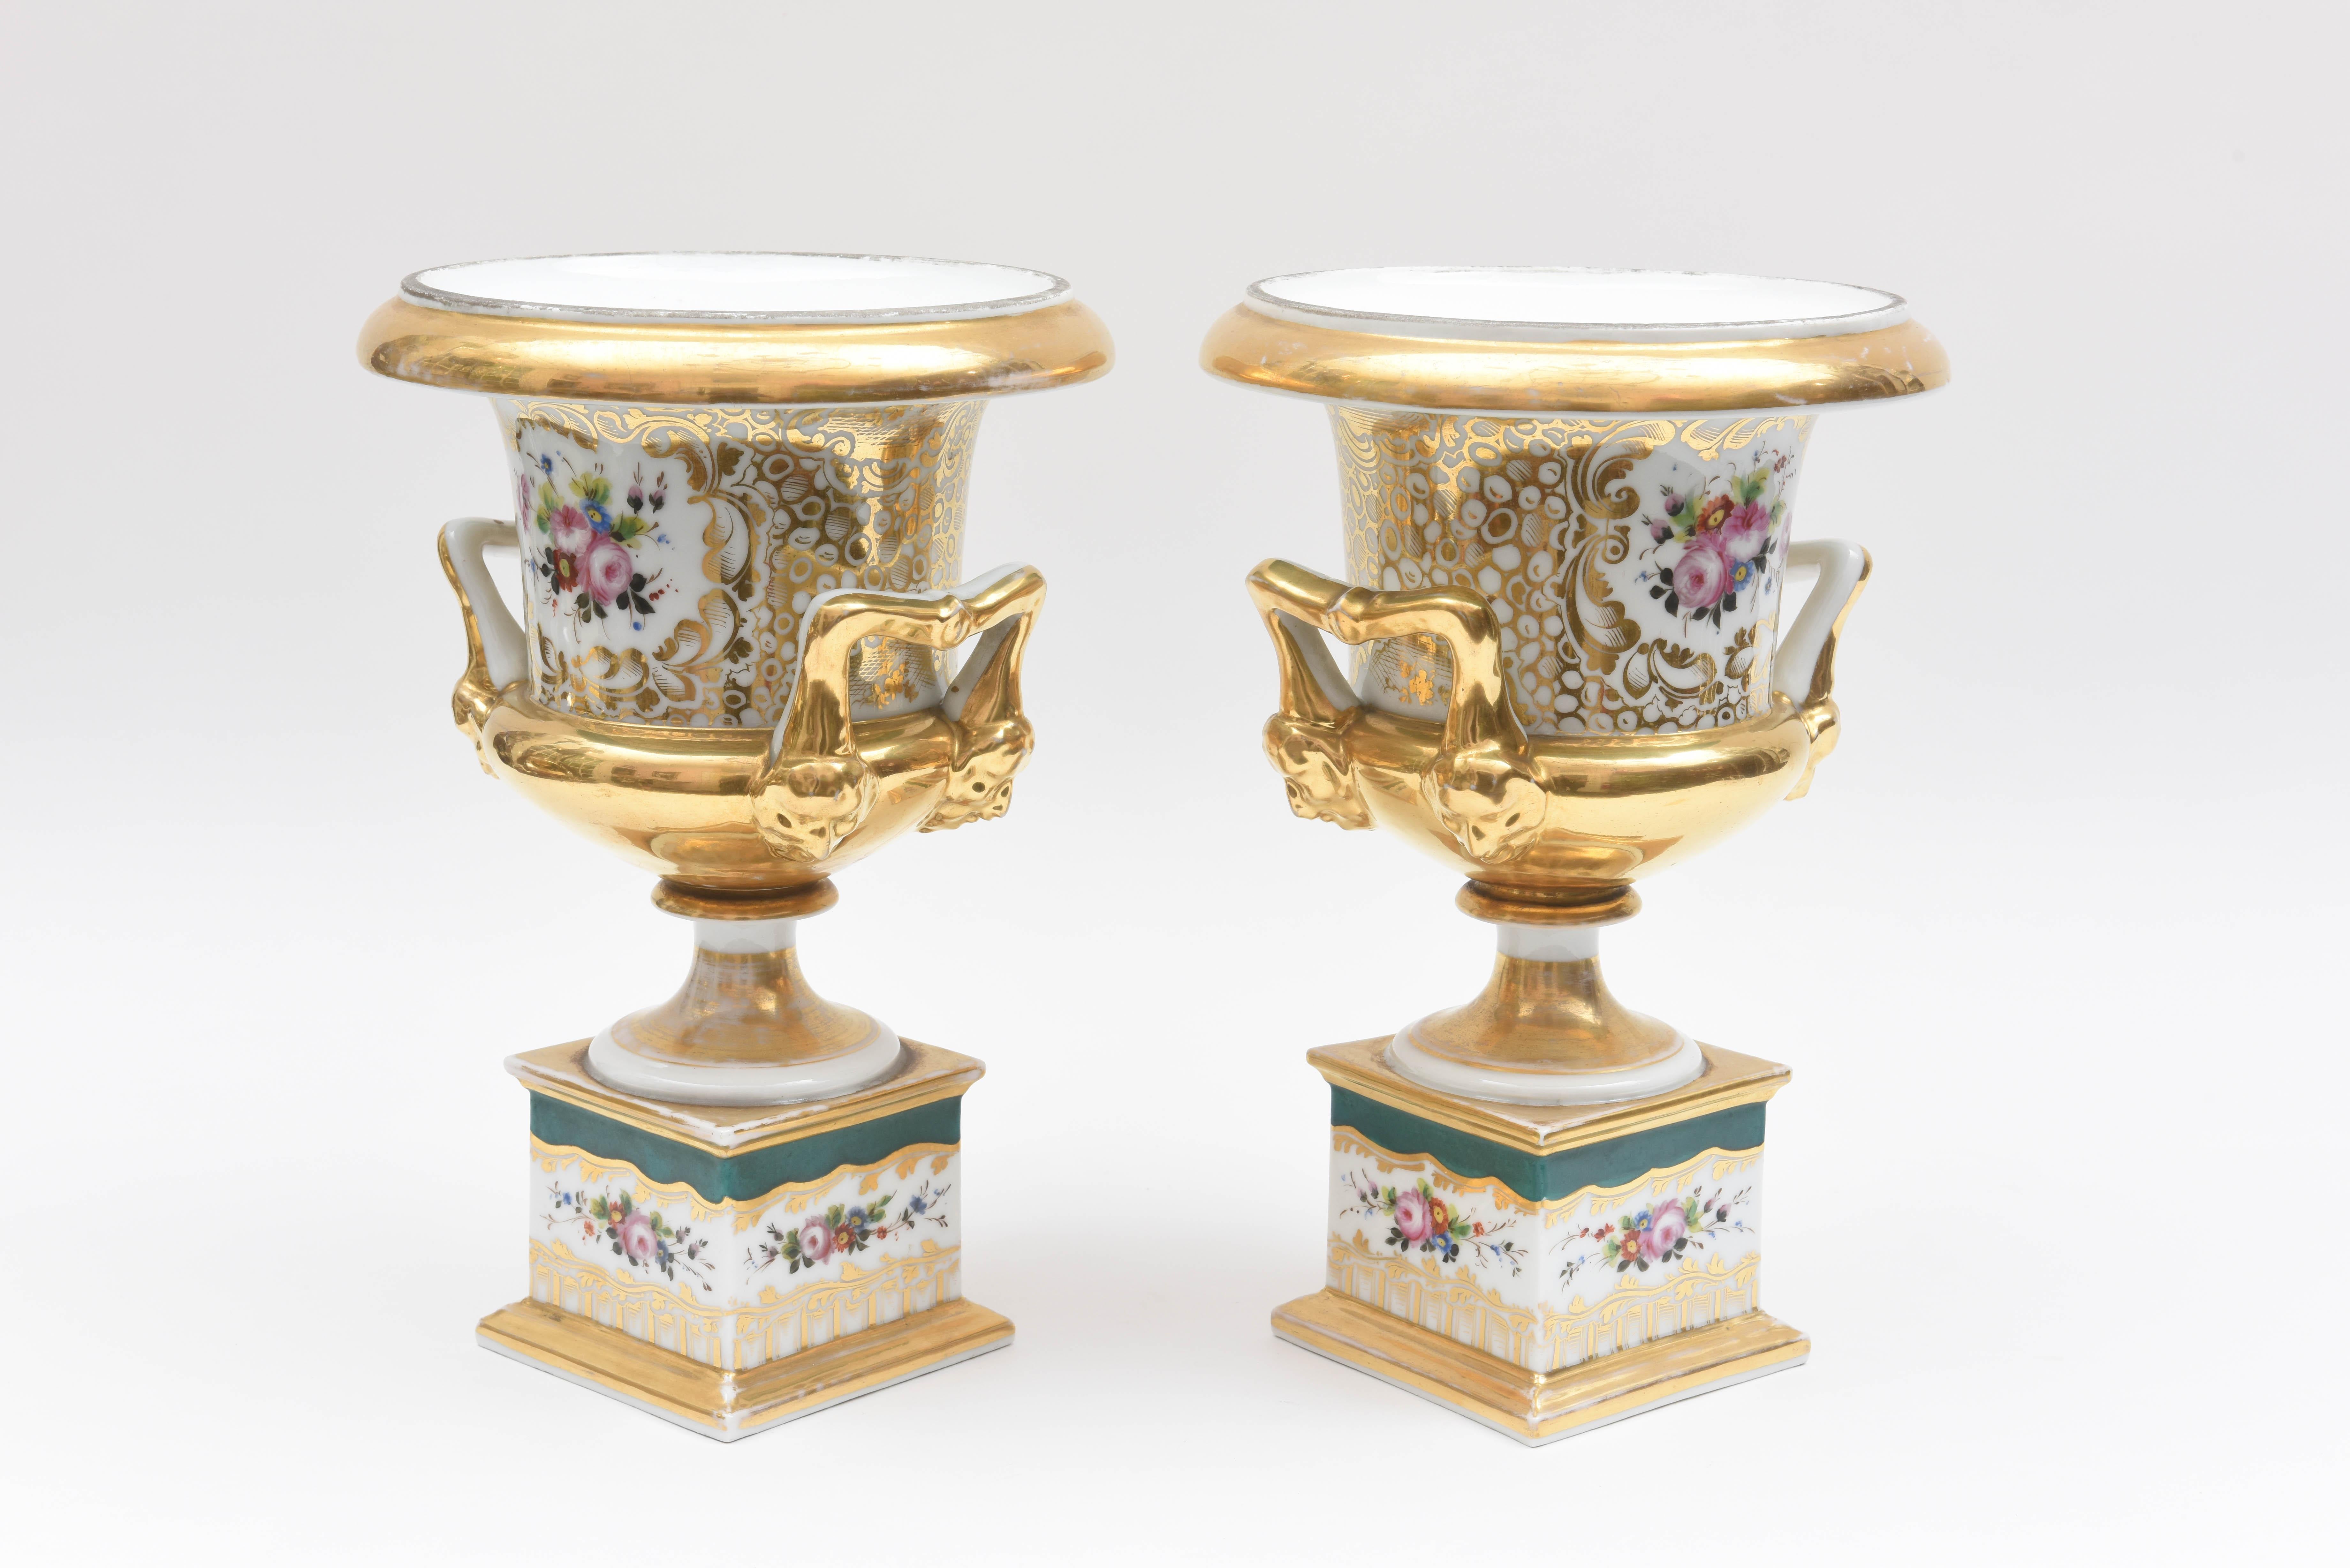 A classic and elegant pair of vases from one of the storied Old Paris porcelain factories. Crisp white porcelain ground with full hand-painted flower surrounds. Accented with a rich green color and retaining much of its original 24-karat gold.